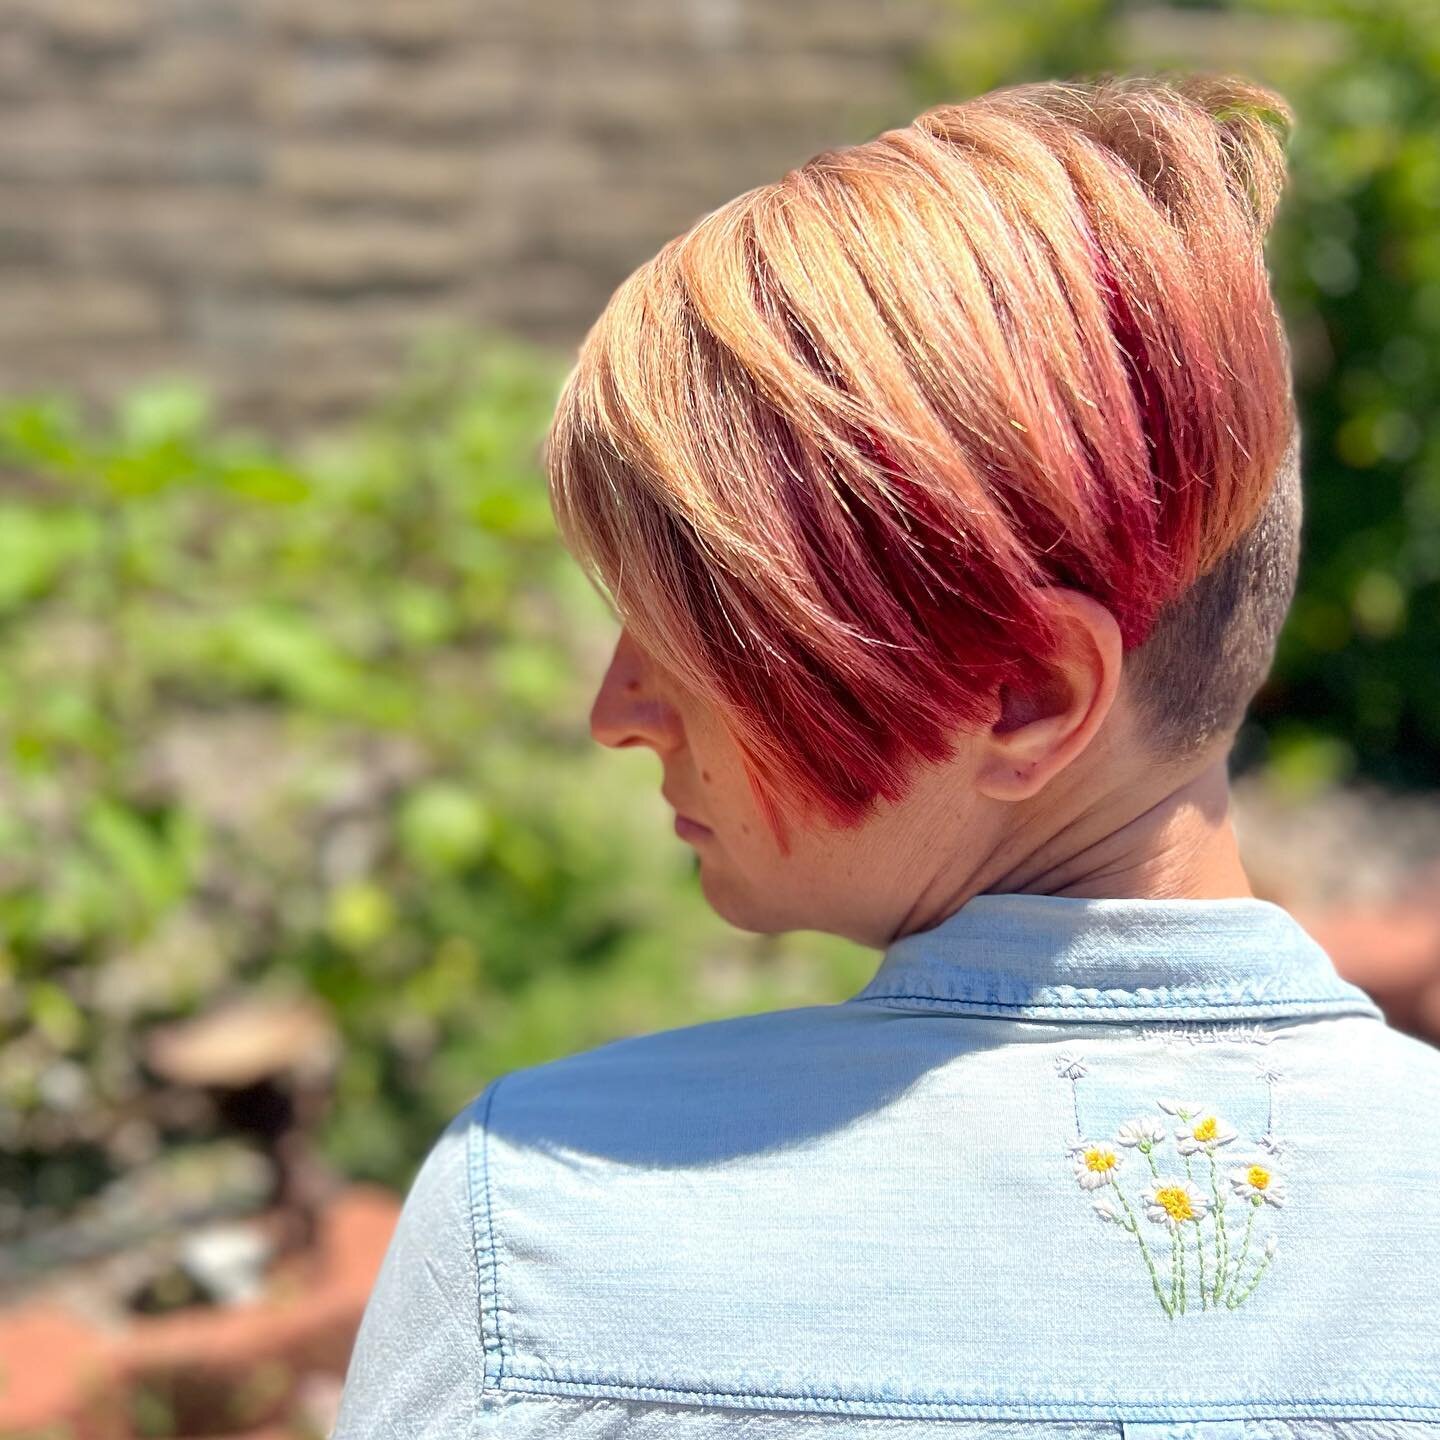 I will always try to look for the little bit of beauty and goodness in the world. 

Even if it means creating it myself, and embroidering little chamomile flowers onto my clothes.

[Image Description: Lauren, a queer white non binary person with shor